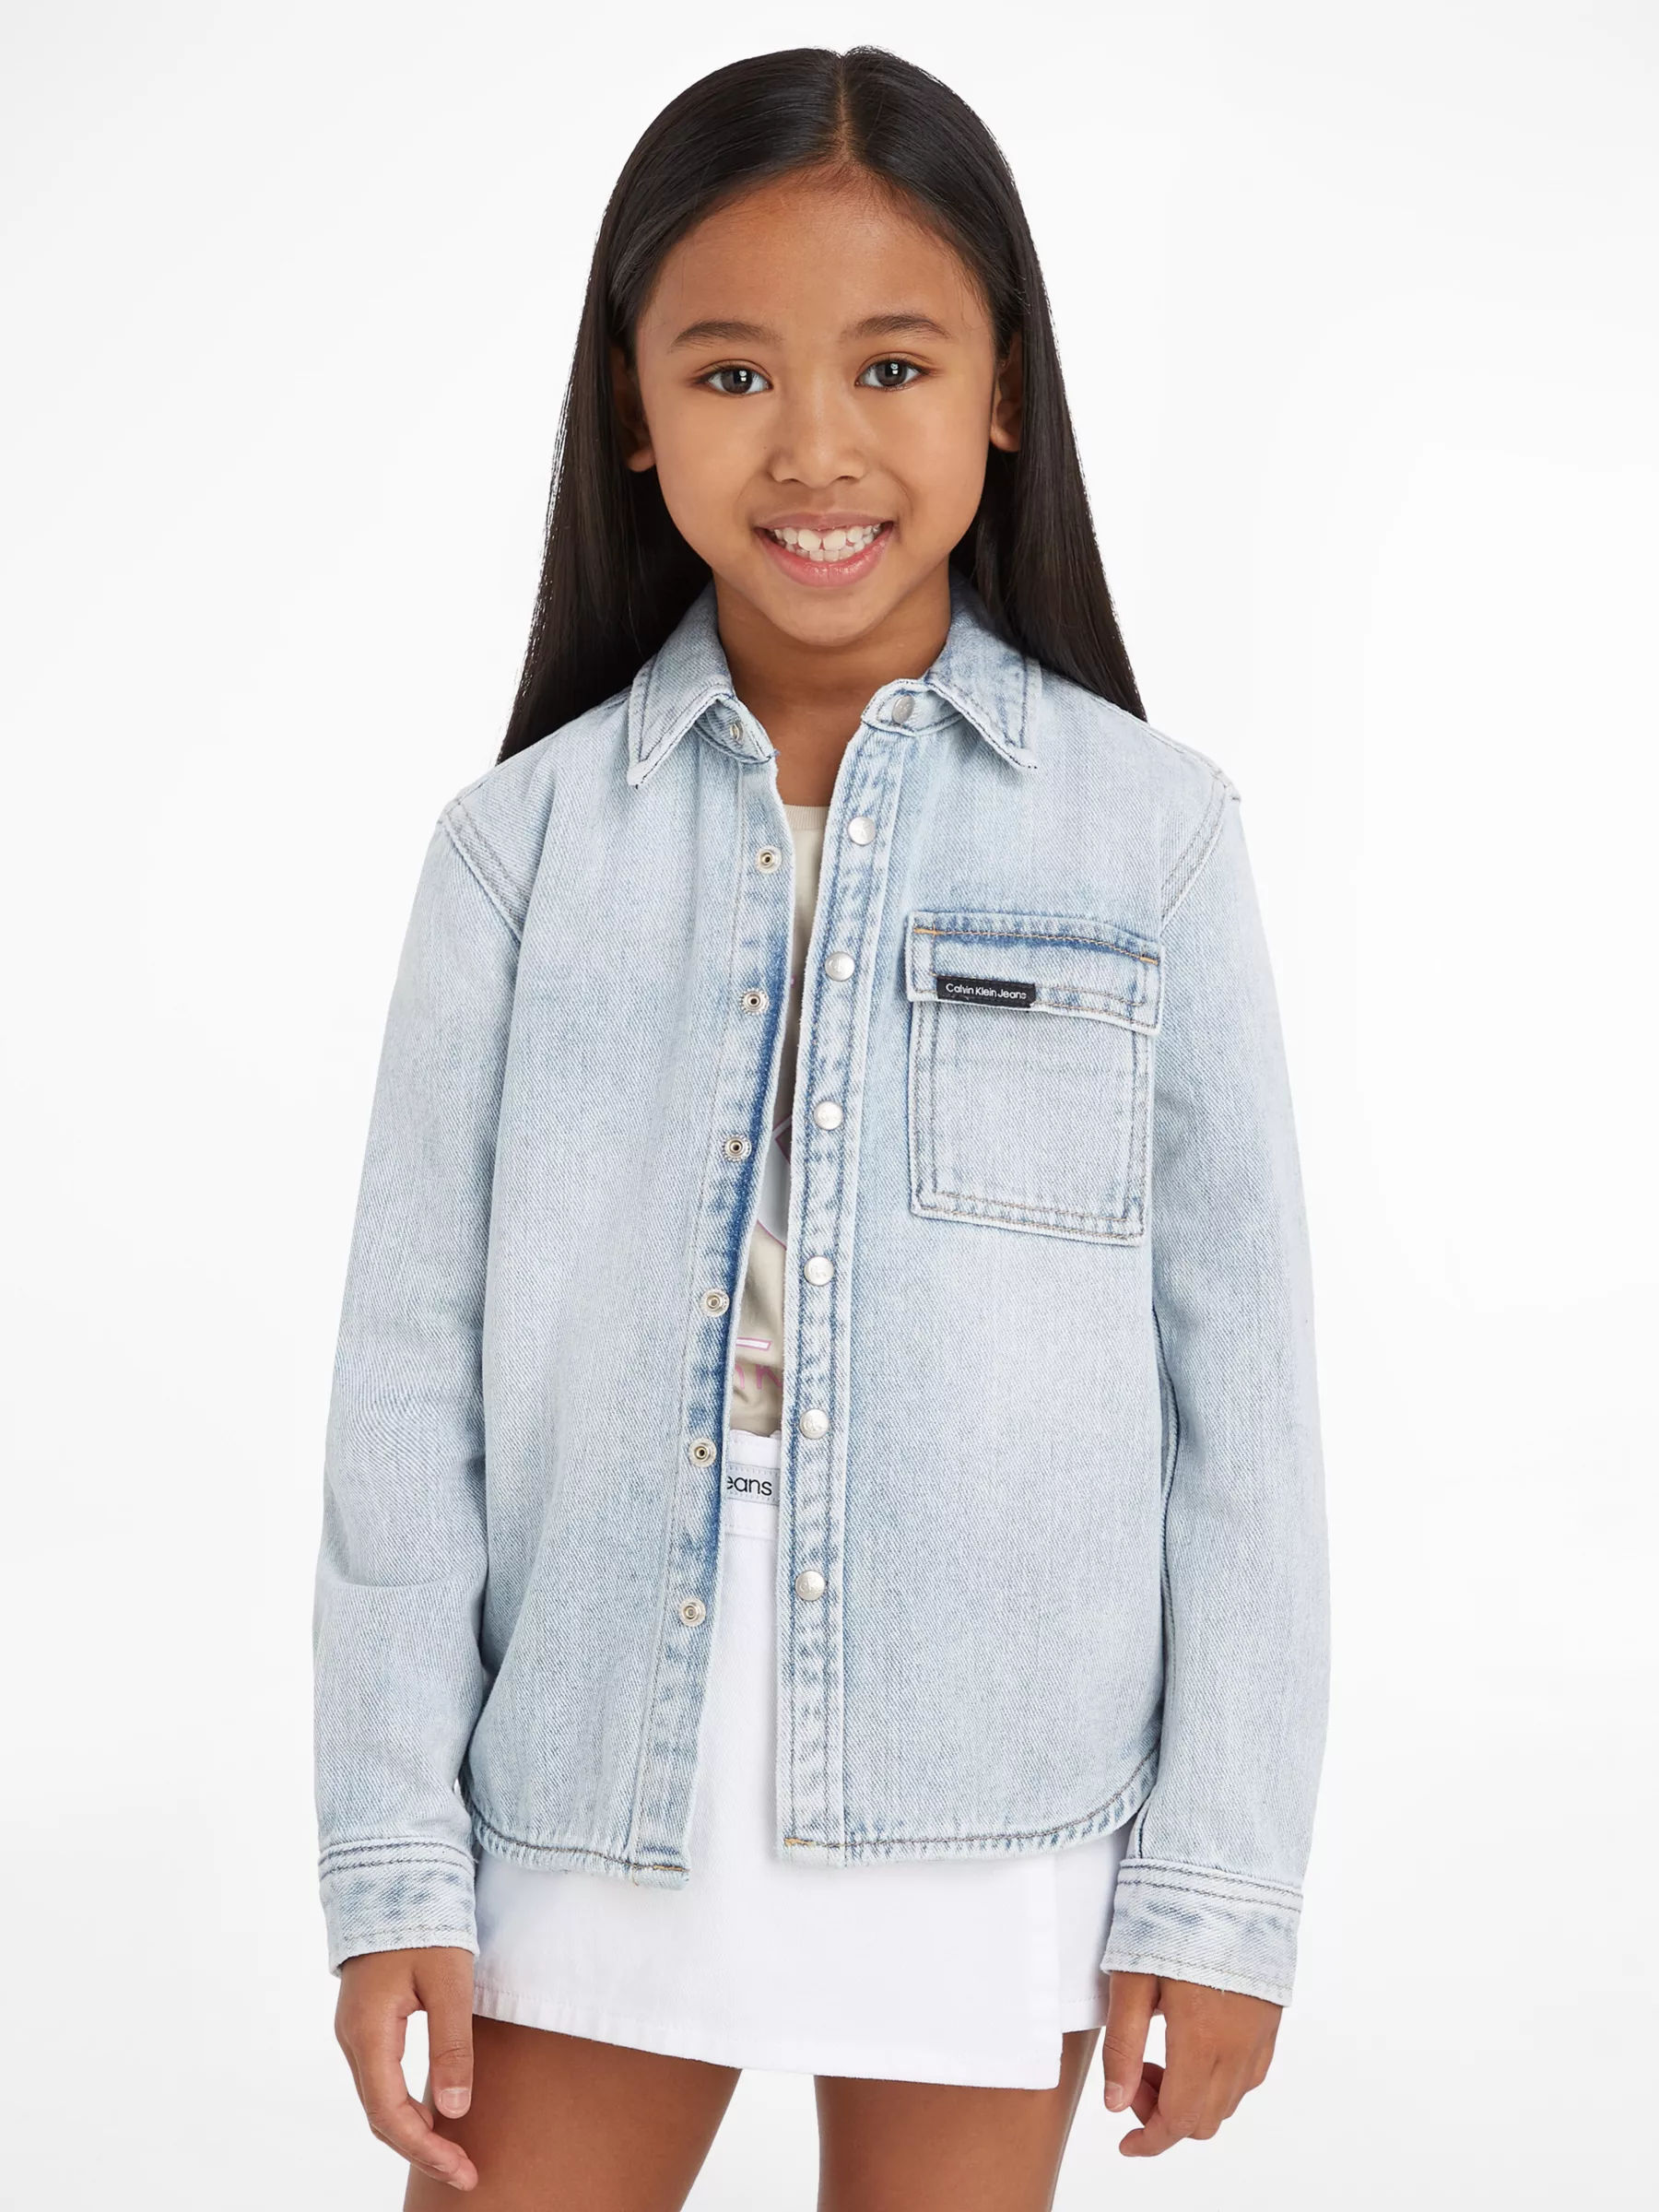 Girls Dresses Girl Dress Blue Denim Shirt For Girls Single Breasted Kids  With Sashes Autumn Spring Preppy Style Clothes From Guayejuyi, $18.97 |  DHgate.Com